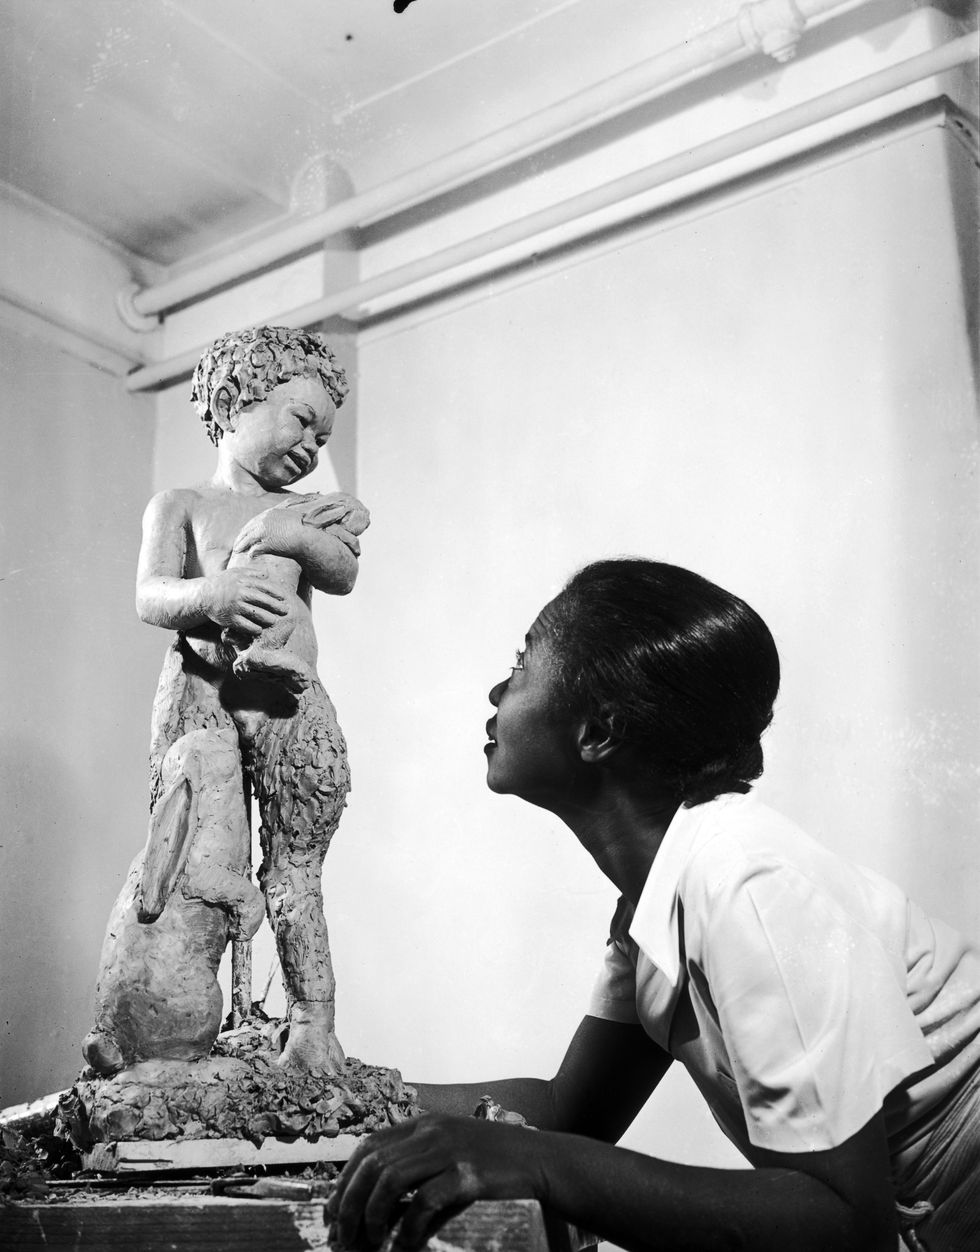 Augusta Savage working on a piece, New York, NY, 1938